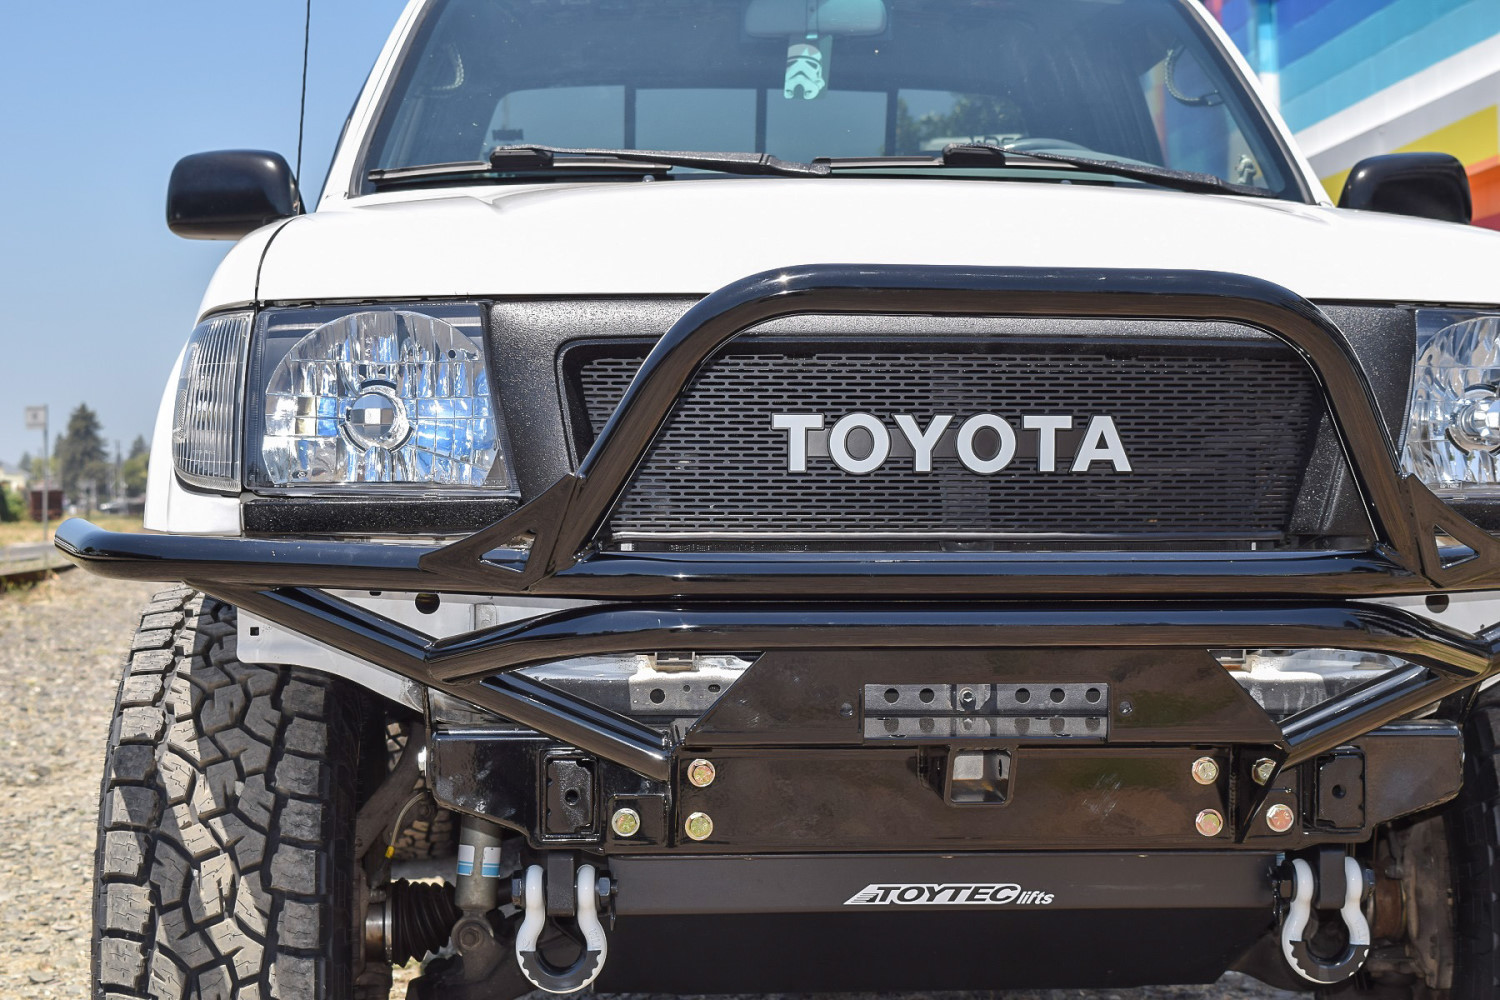 23-Year-Old Tacoma Gets a Custom Makeover with Retro Grille and Emblem